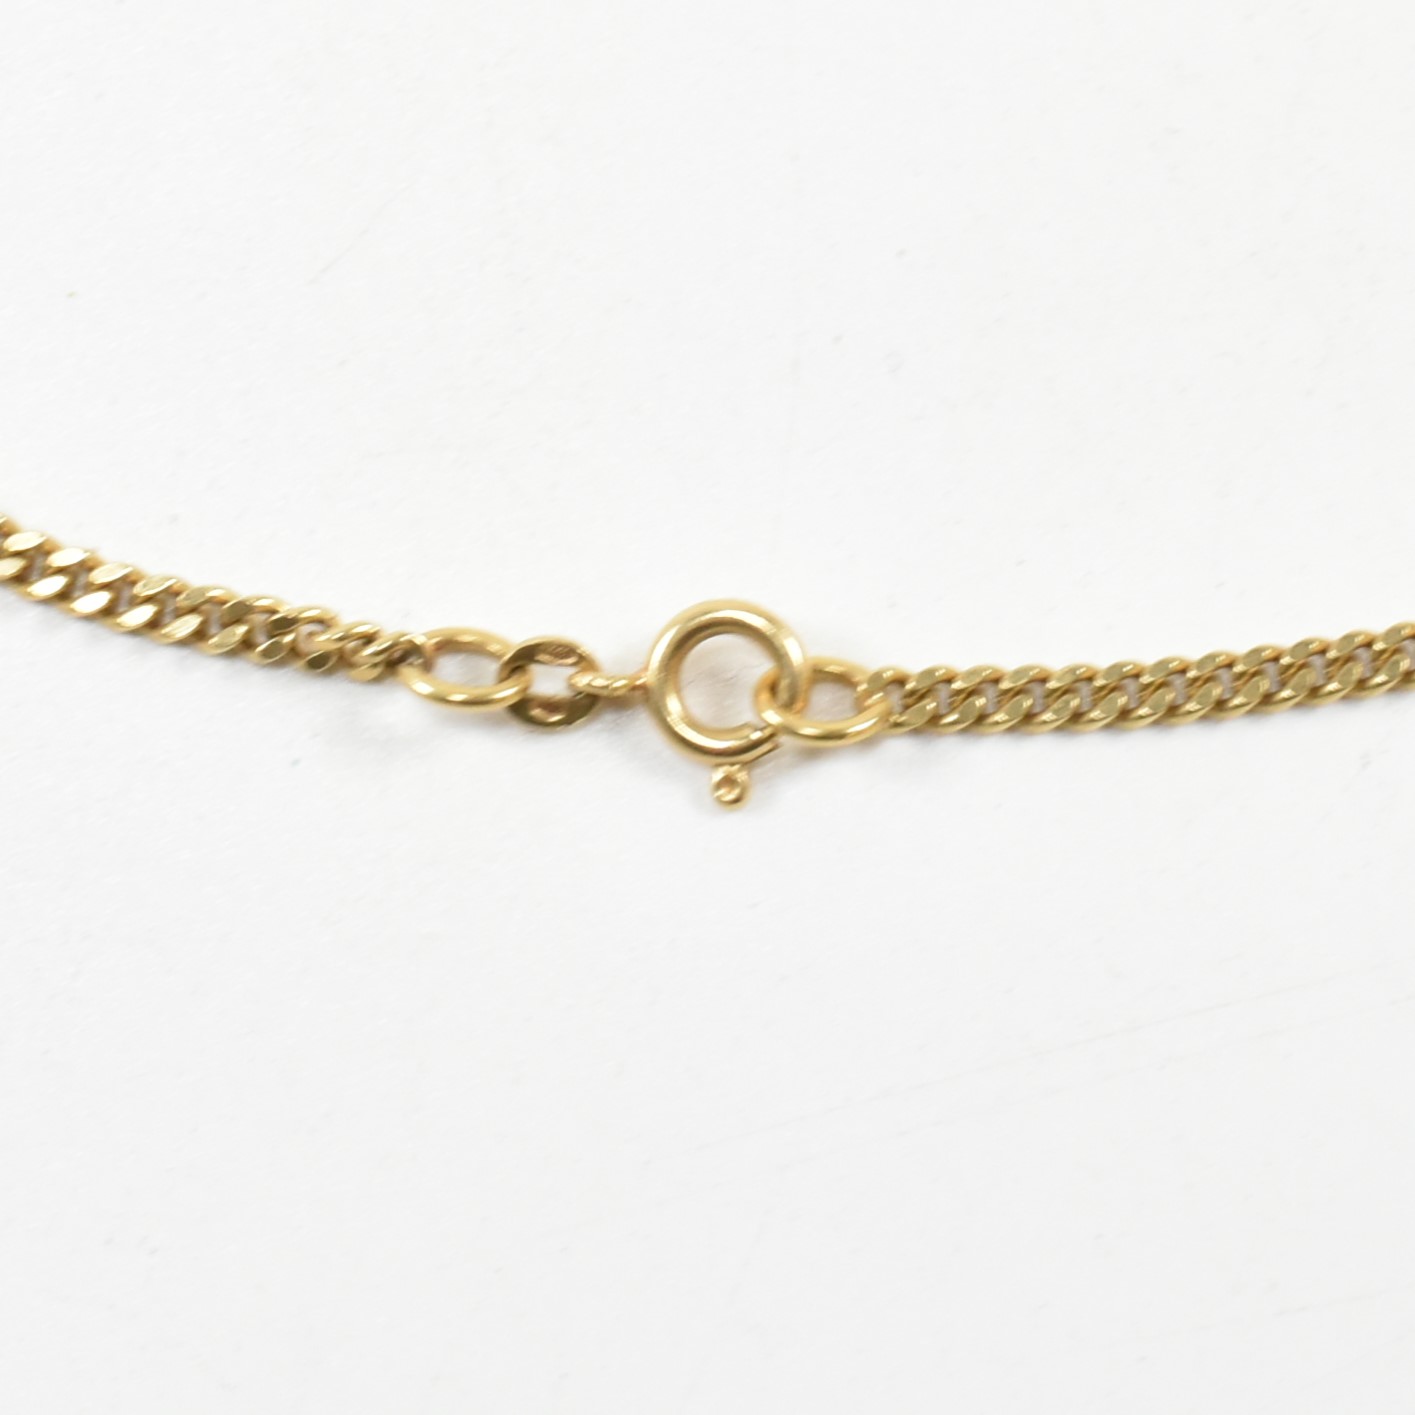 ITALIAN 18CT GOLD CURB LINK CHAIN NECKLACE - Image 2 of 4